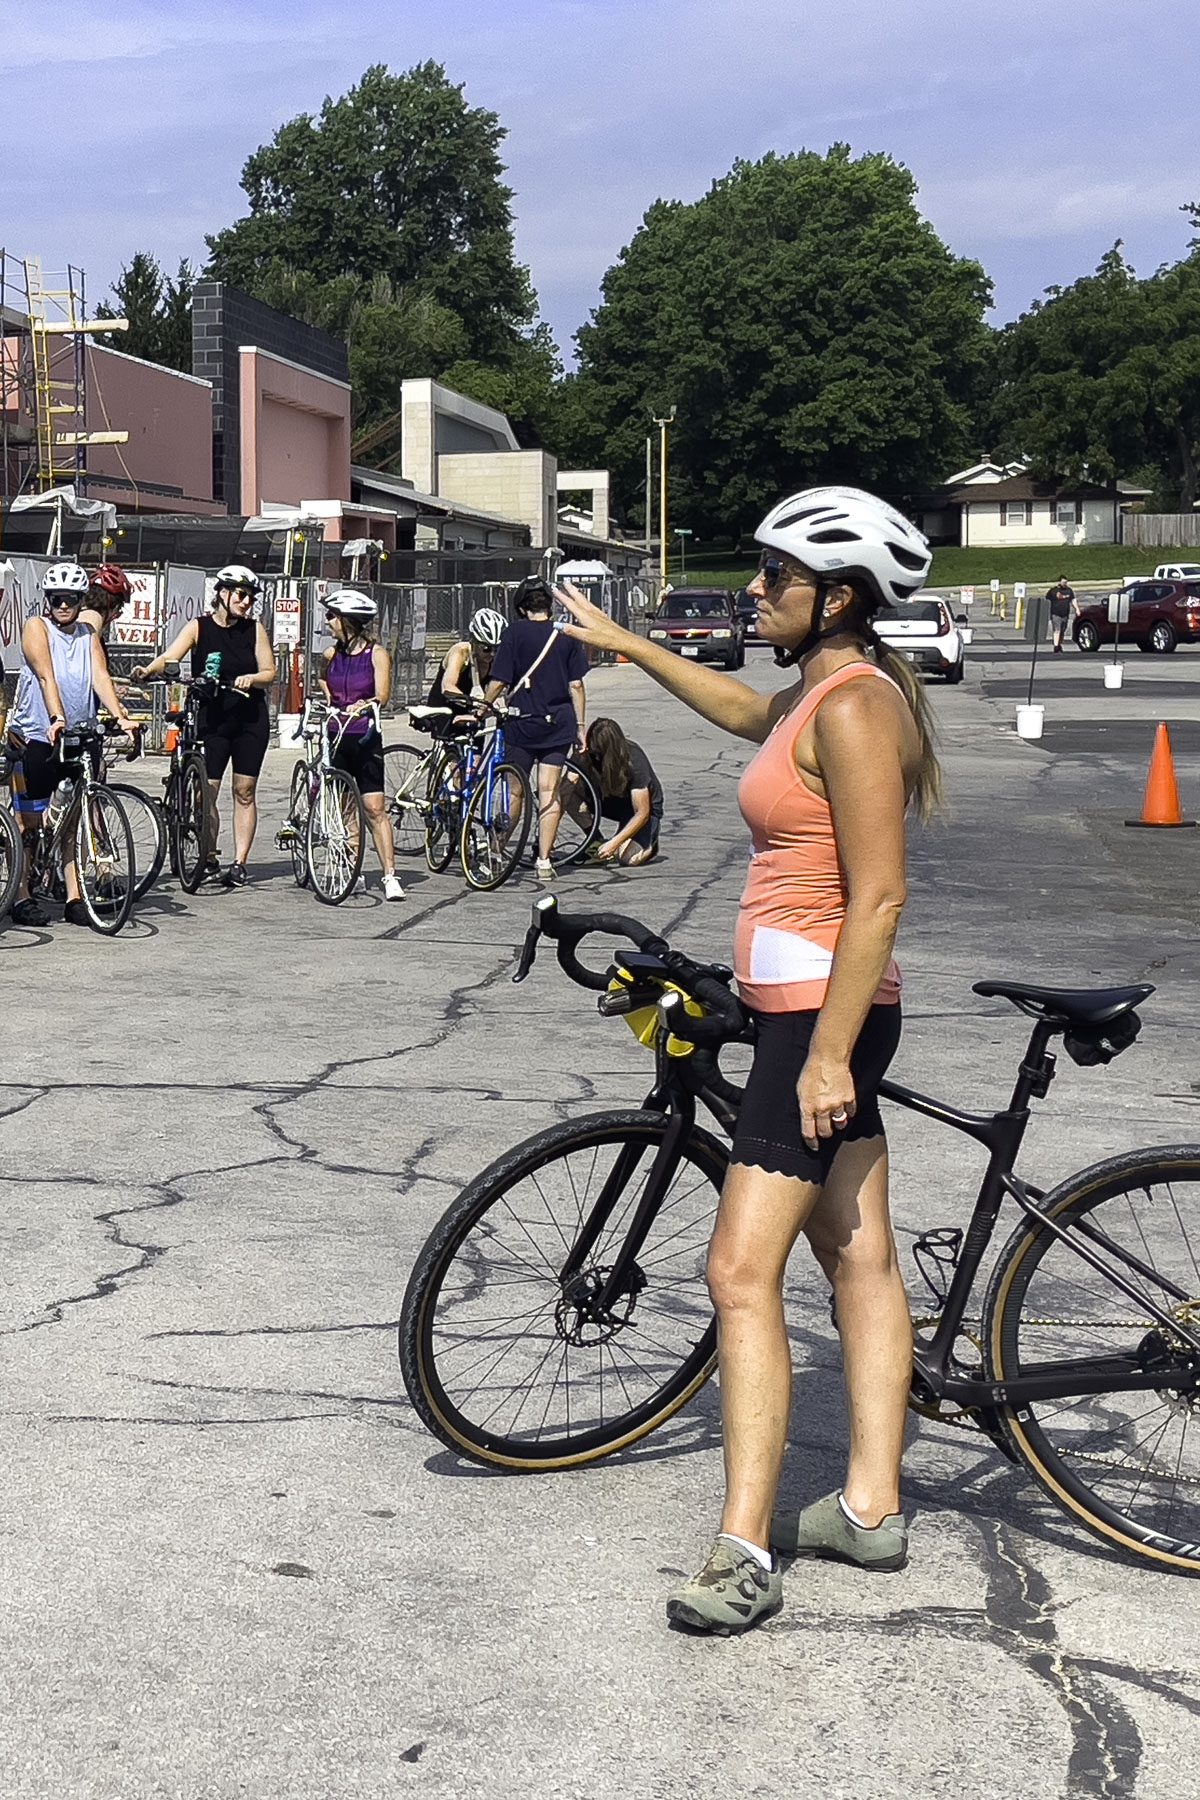 A woman stands next to her bicycle, giving instructions to a group of women on bicycles